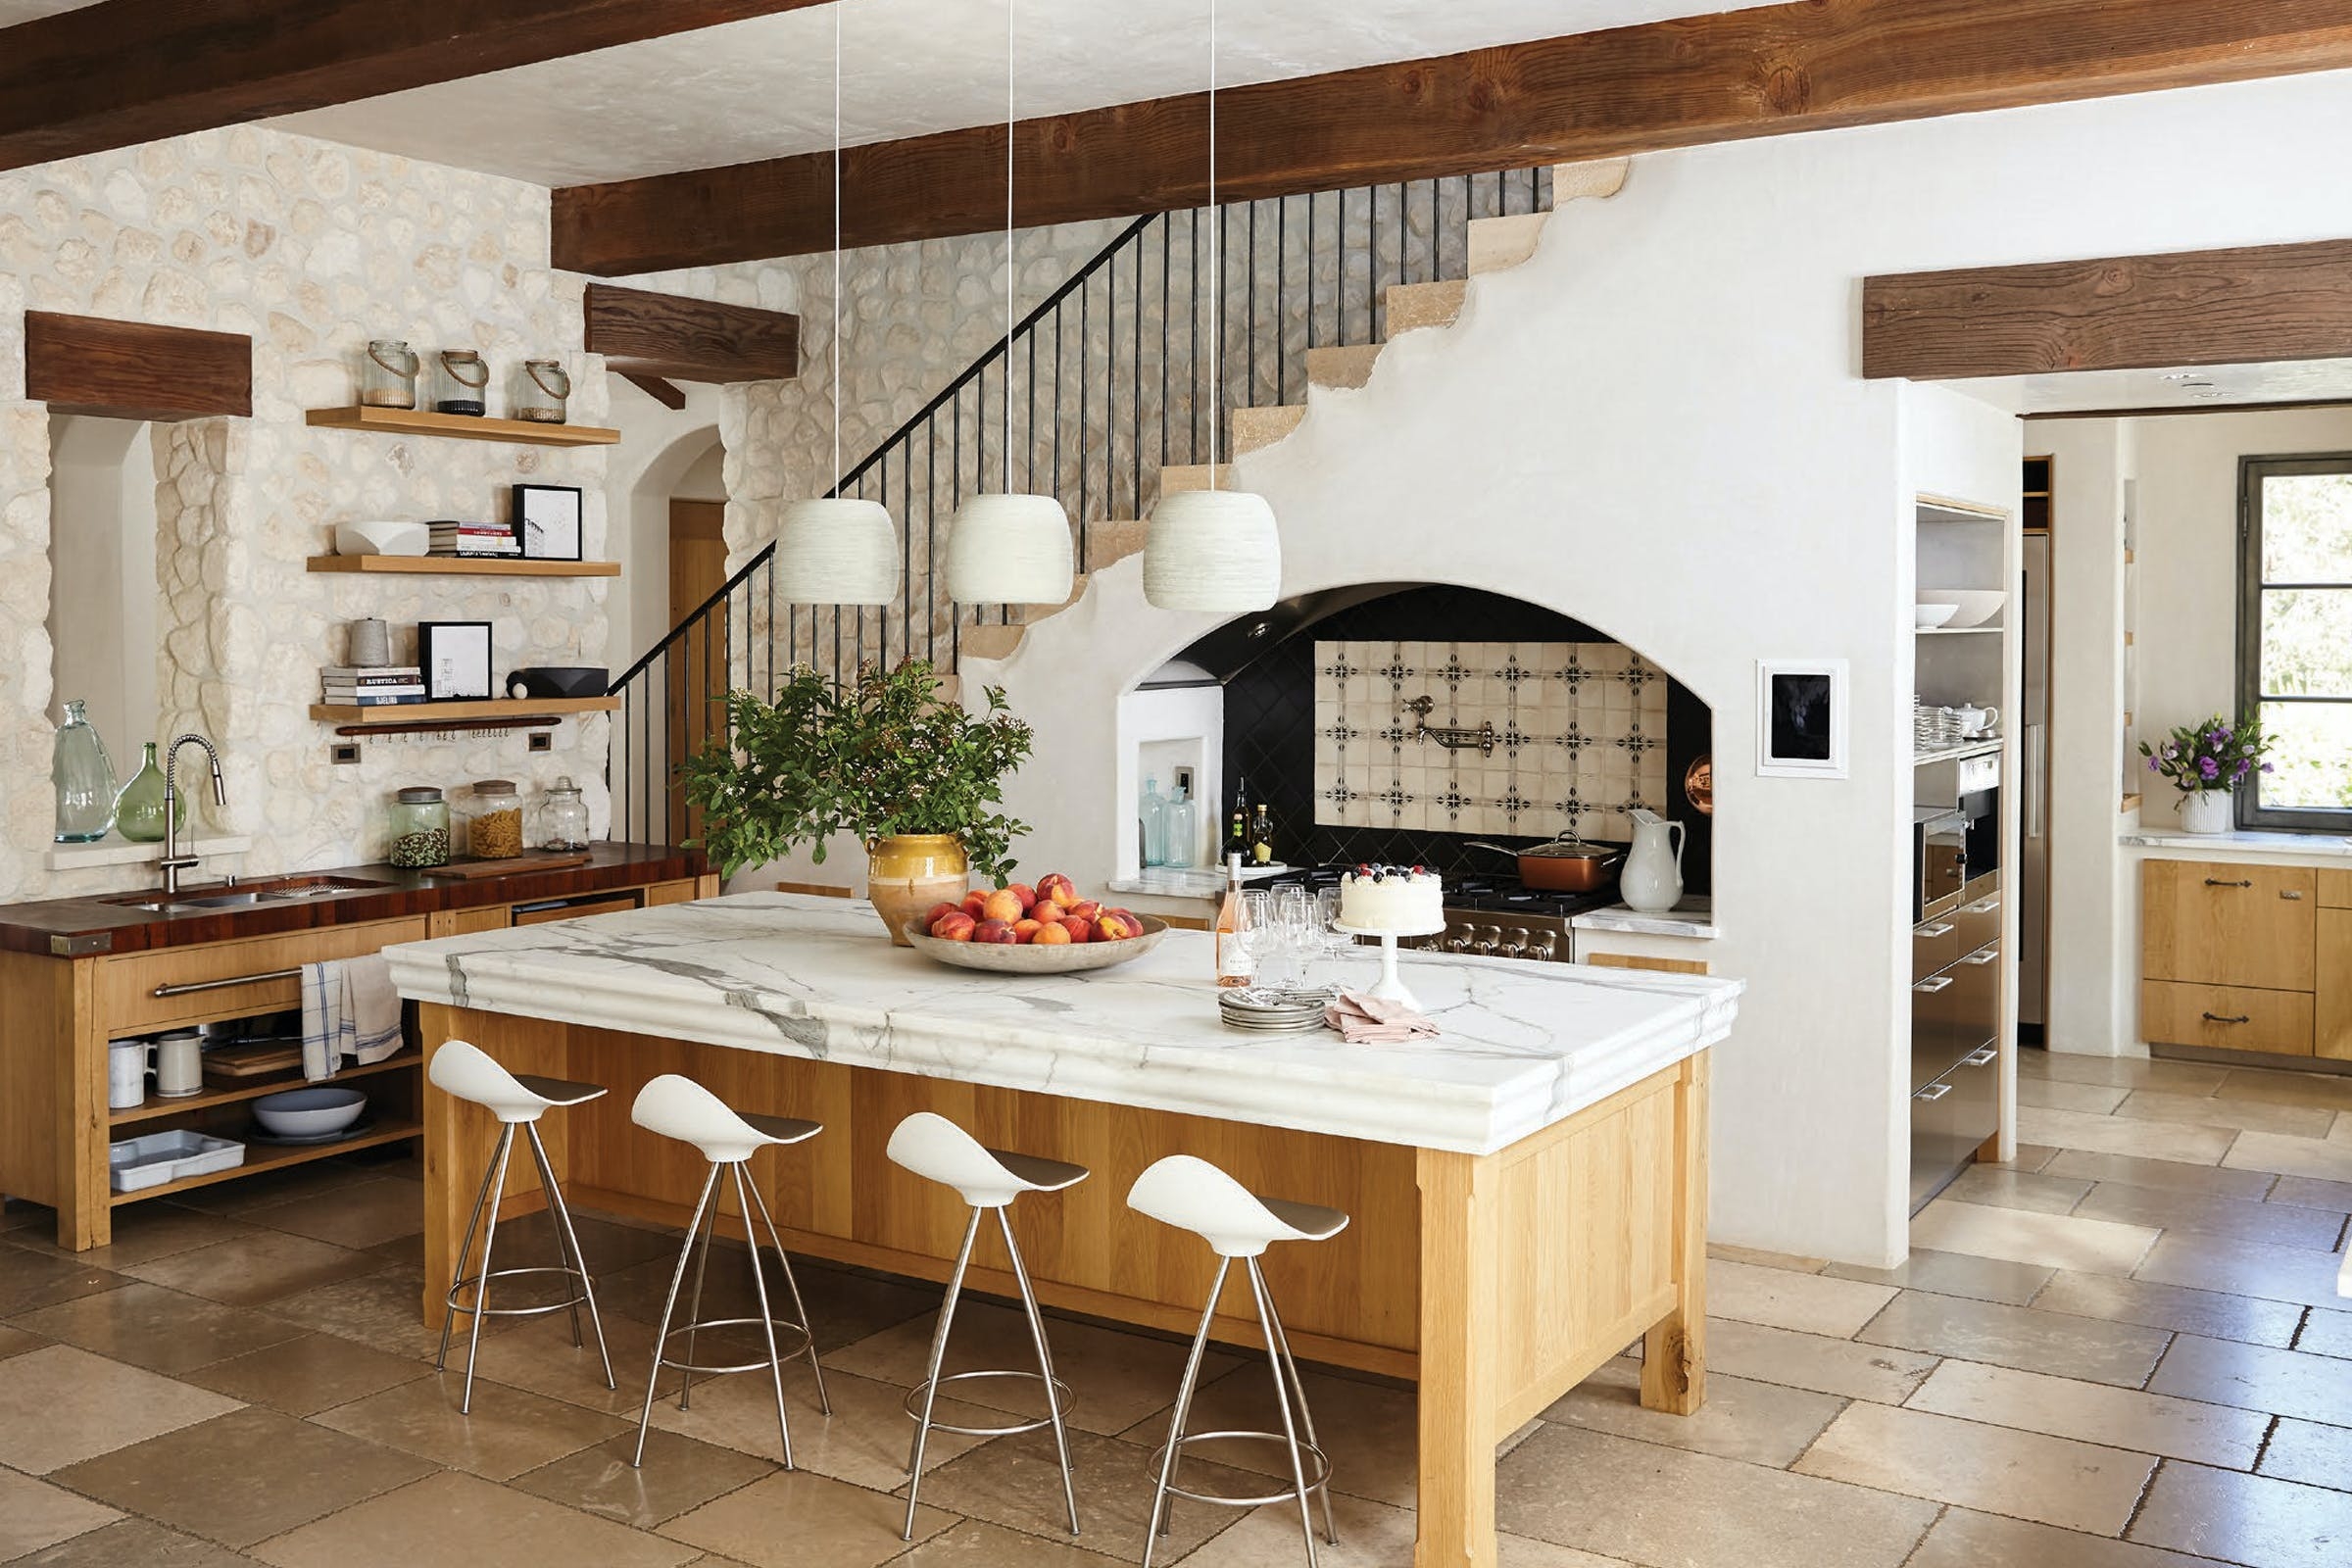 https://foter.com/photos/424/large-french-country-kitchen-with-stone-walls.jpg